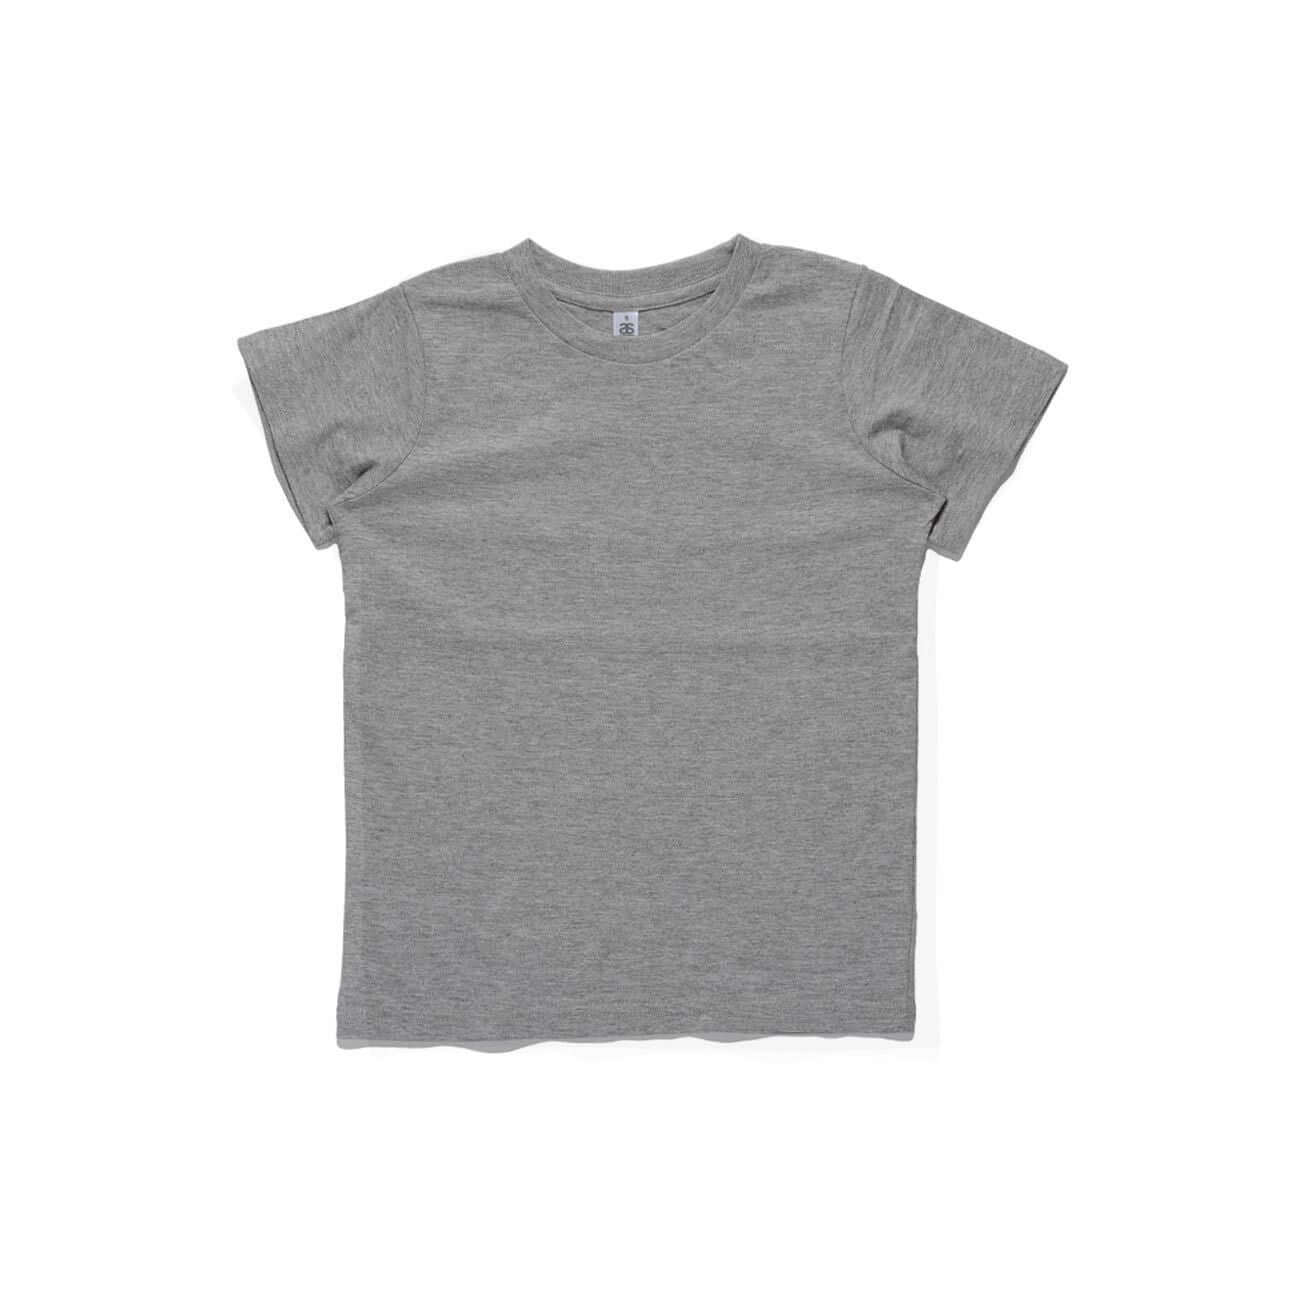 AS Colour Basic Kids Cotton Crew Neck Tee Shirt White, Navy, Coal and Grey Marl - Frankie's Story - 4